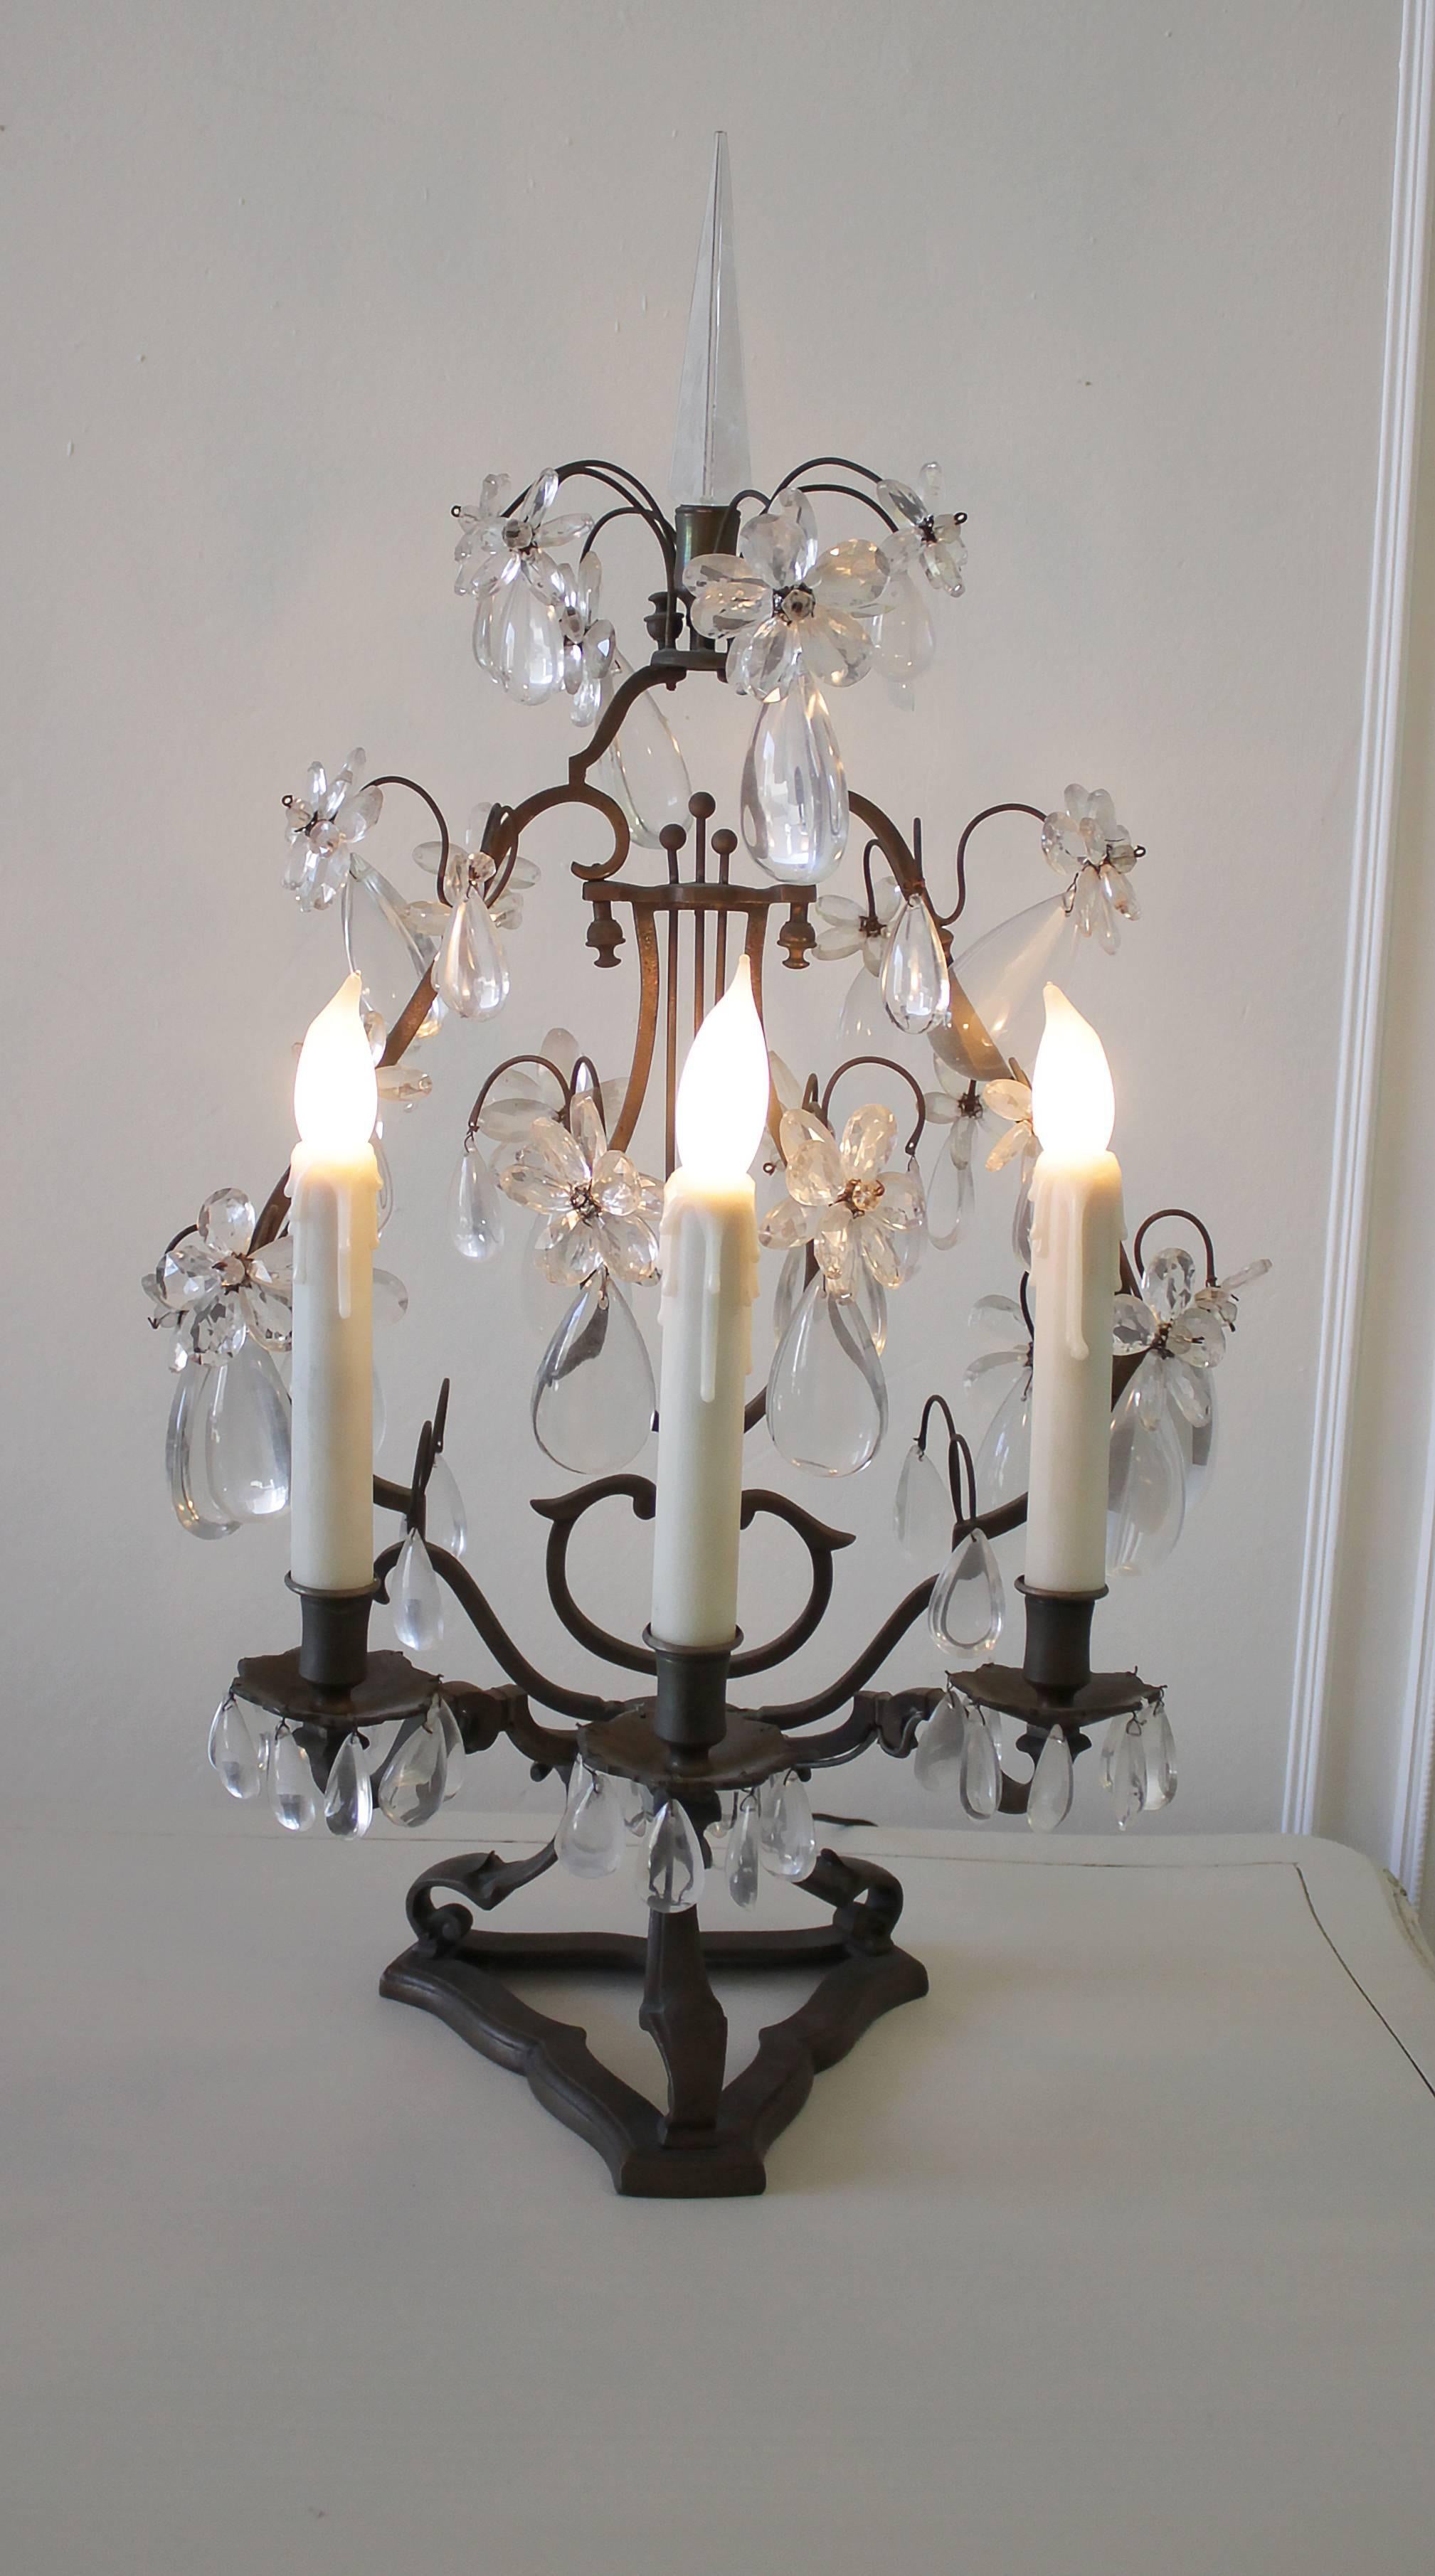 19th century bronze and crystal girandole from France. Ornately cut, tear shaped crystals, each with ten petal floral crystals above, adorn every inch of these candelabras. The frames are made of scrolled bronze resembling a harp, bearing an aged